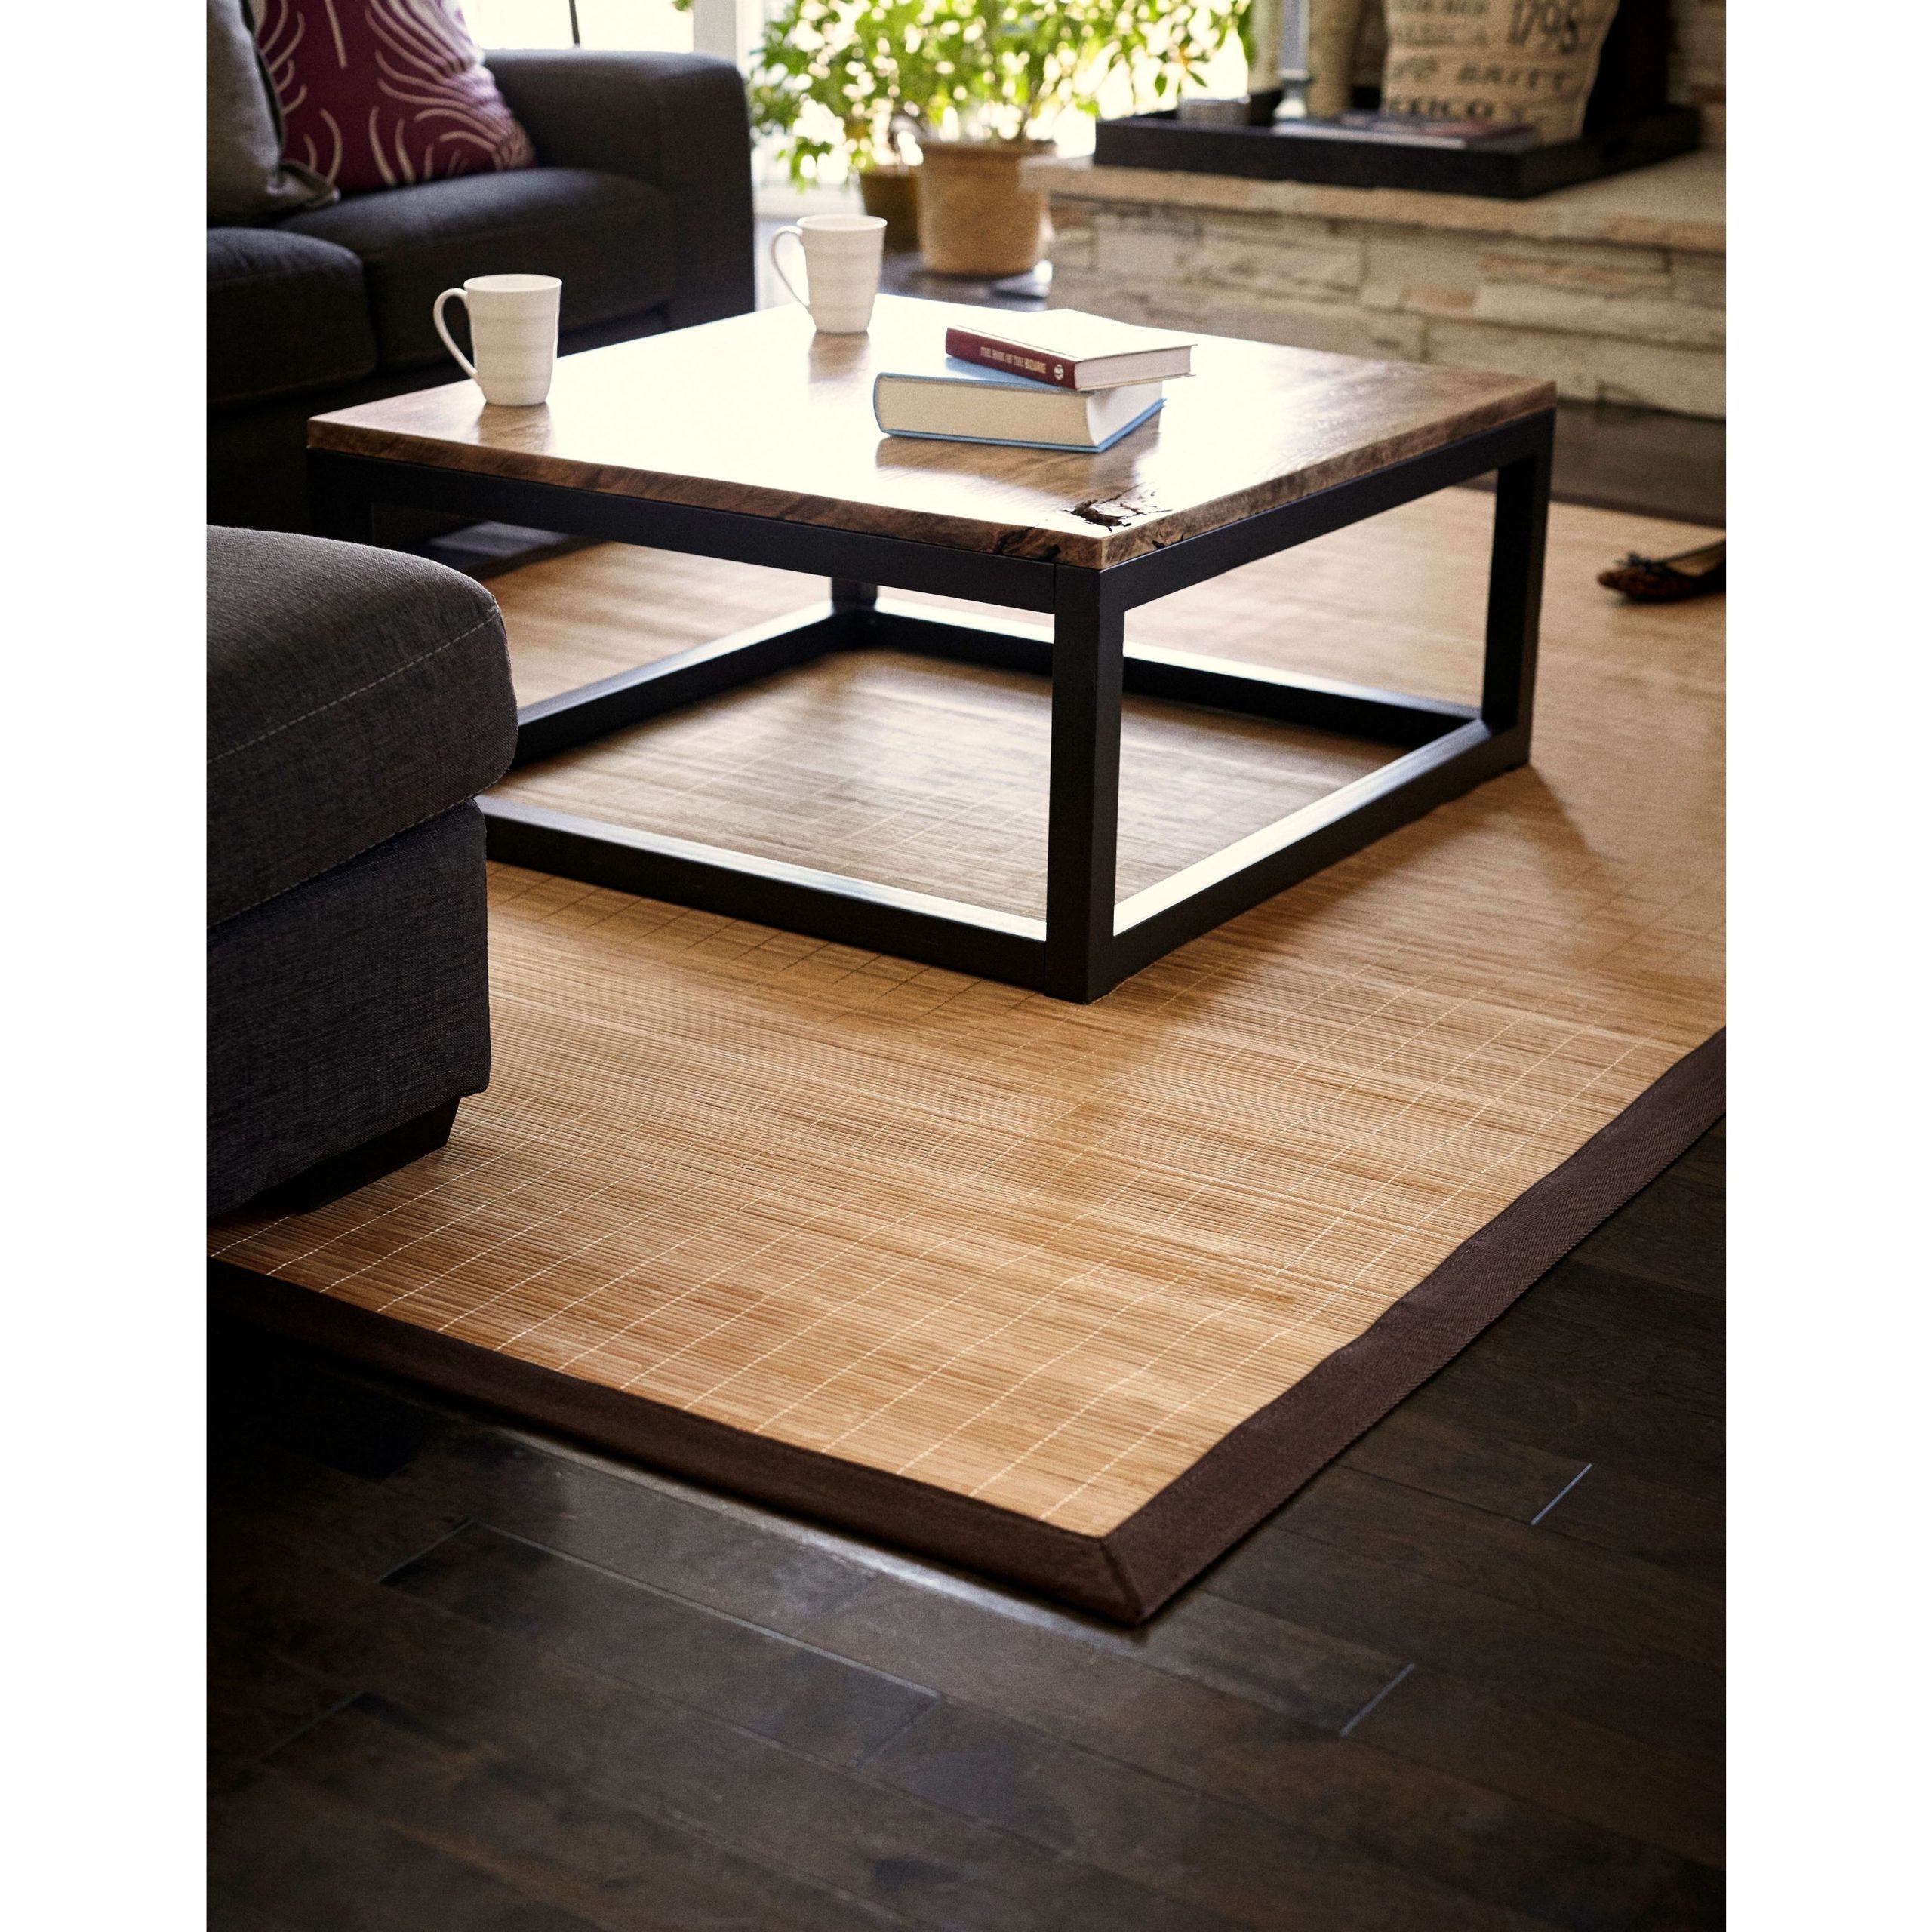 Solid Bamboo Area Rug